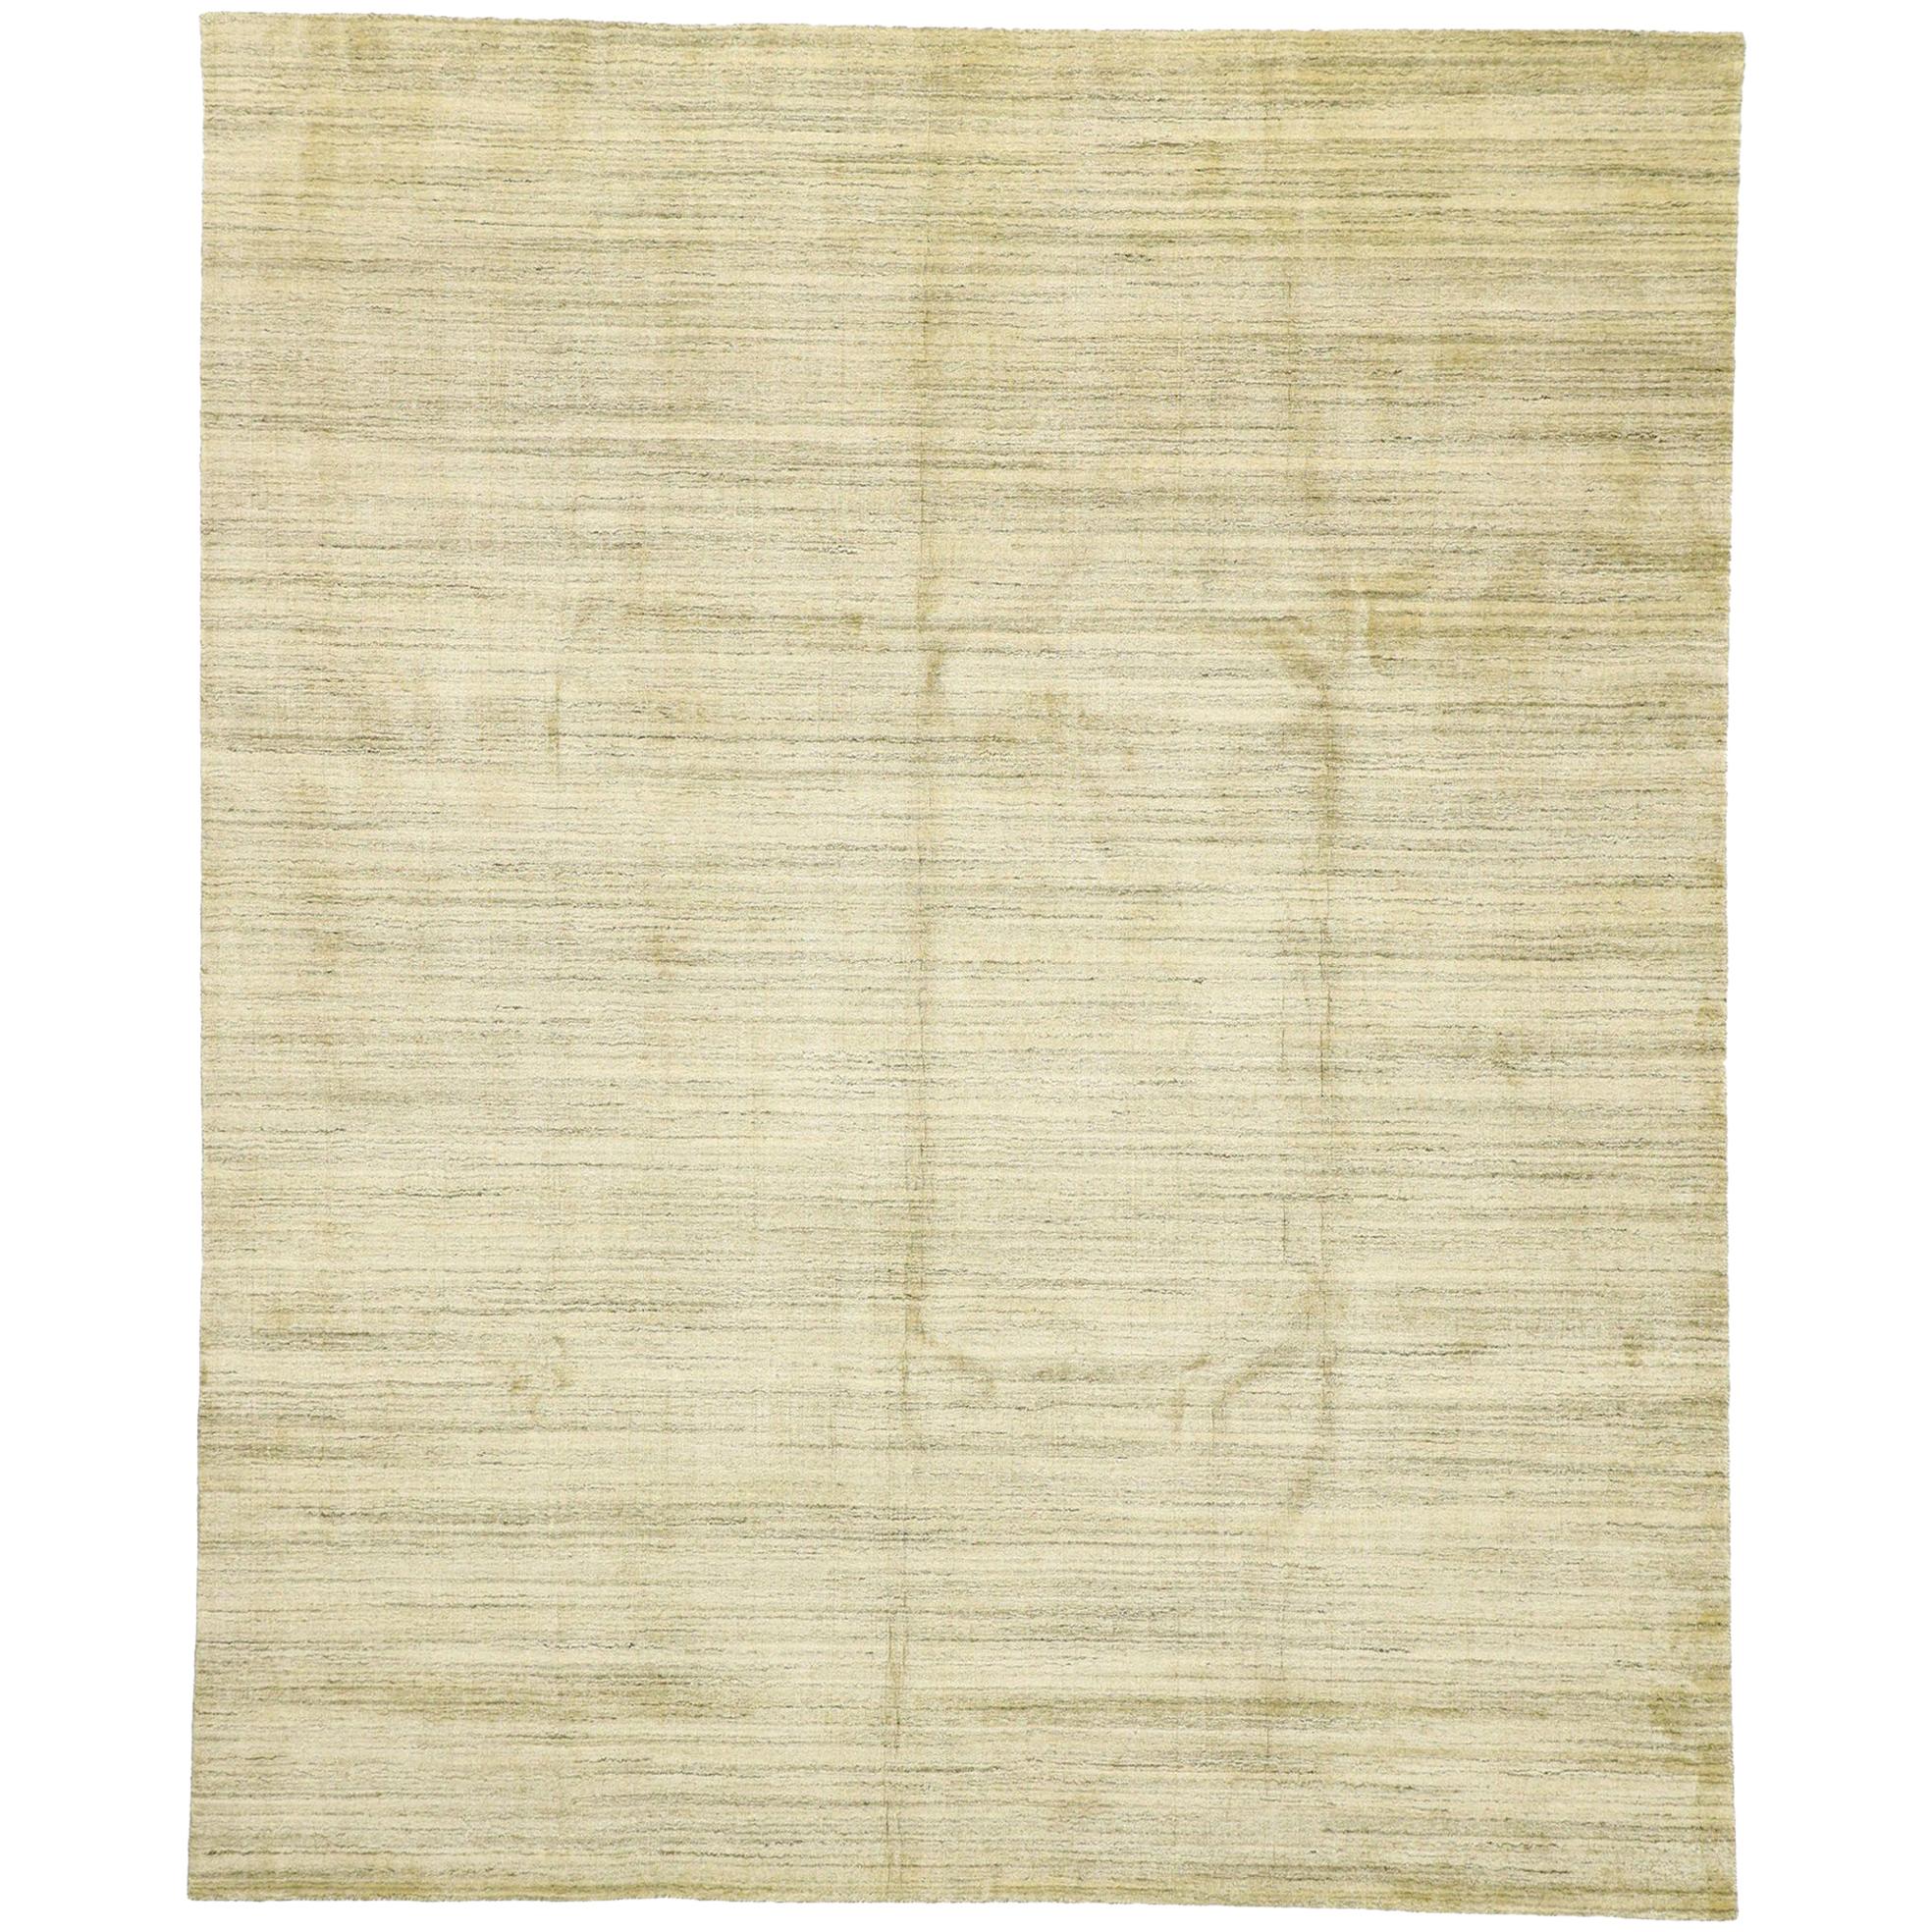 New Transitional Area Rug with Cozy, Hygge Vibes and Warm Amish-Shaker Style